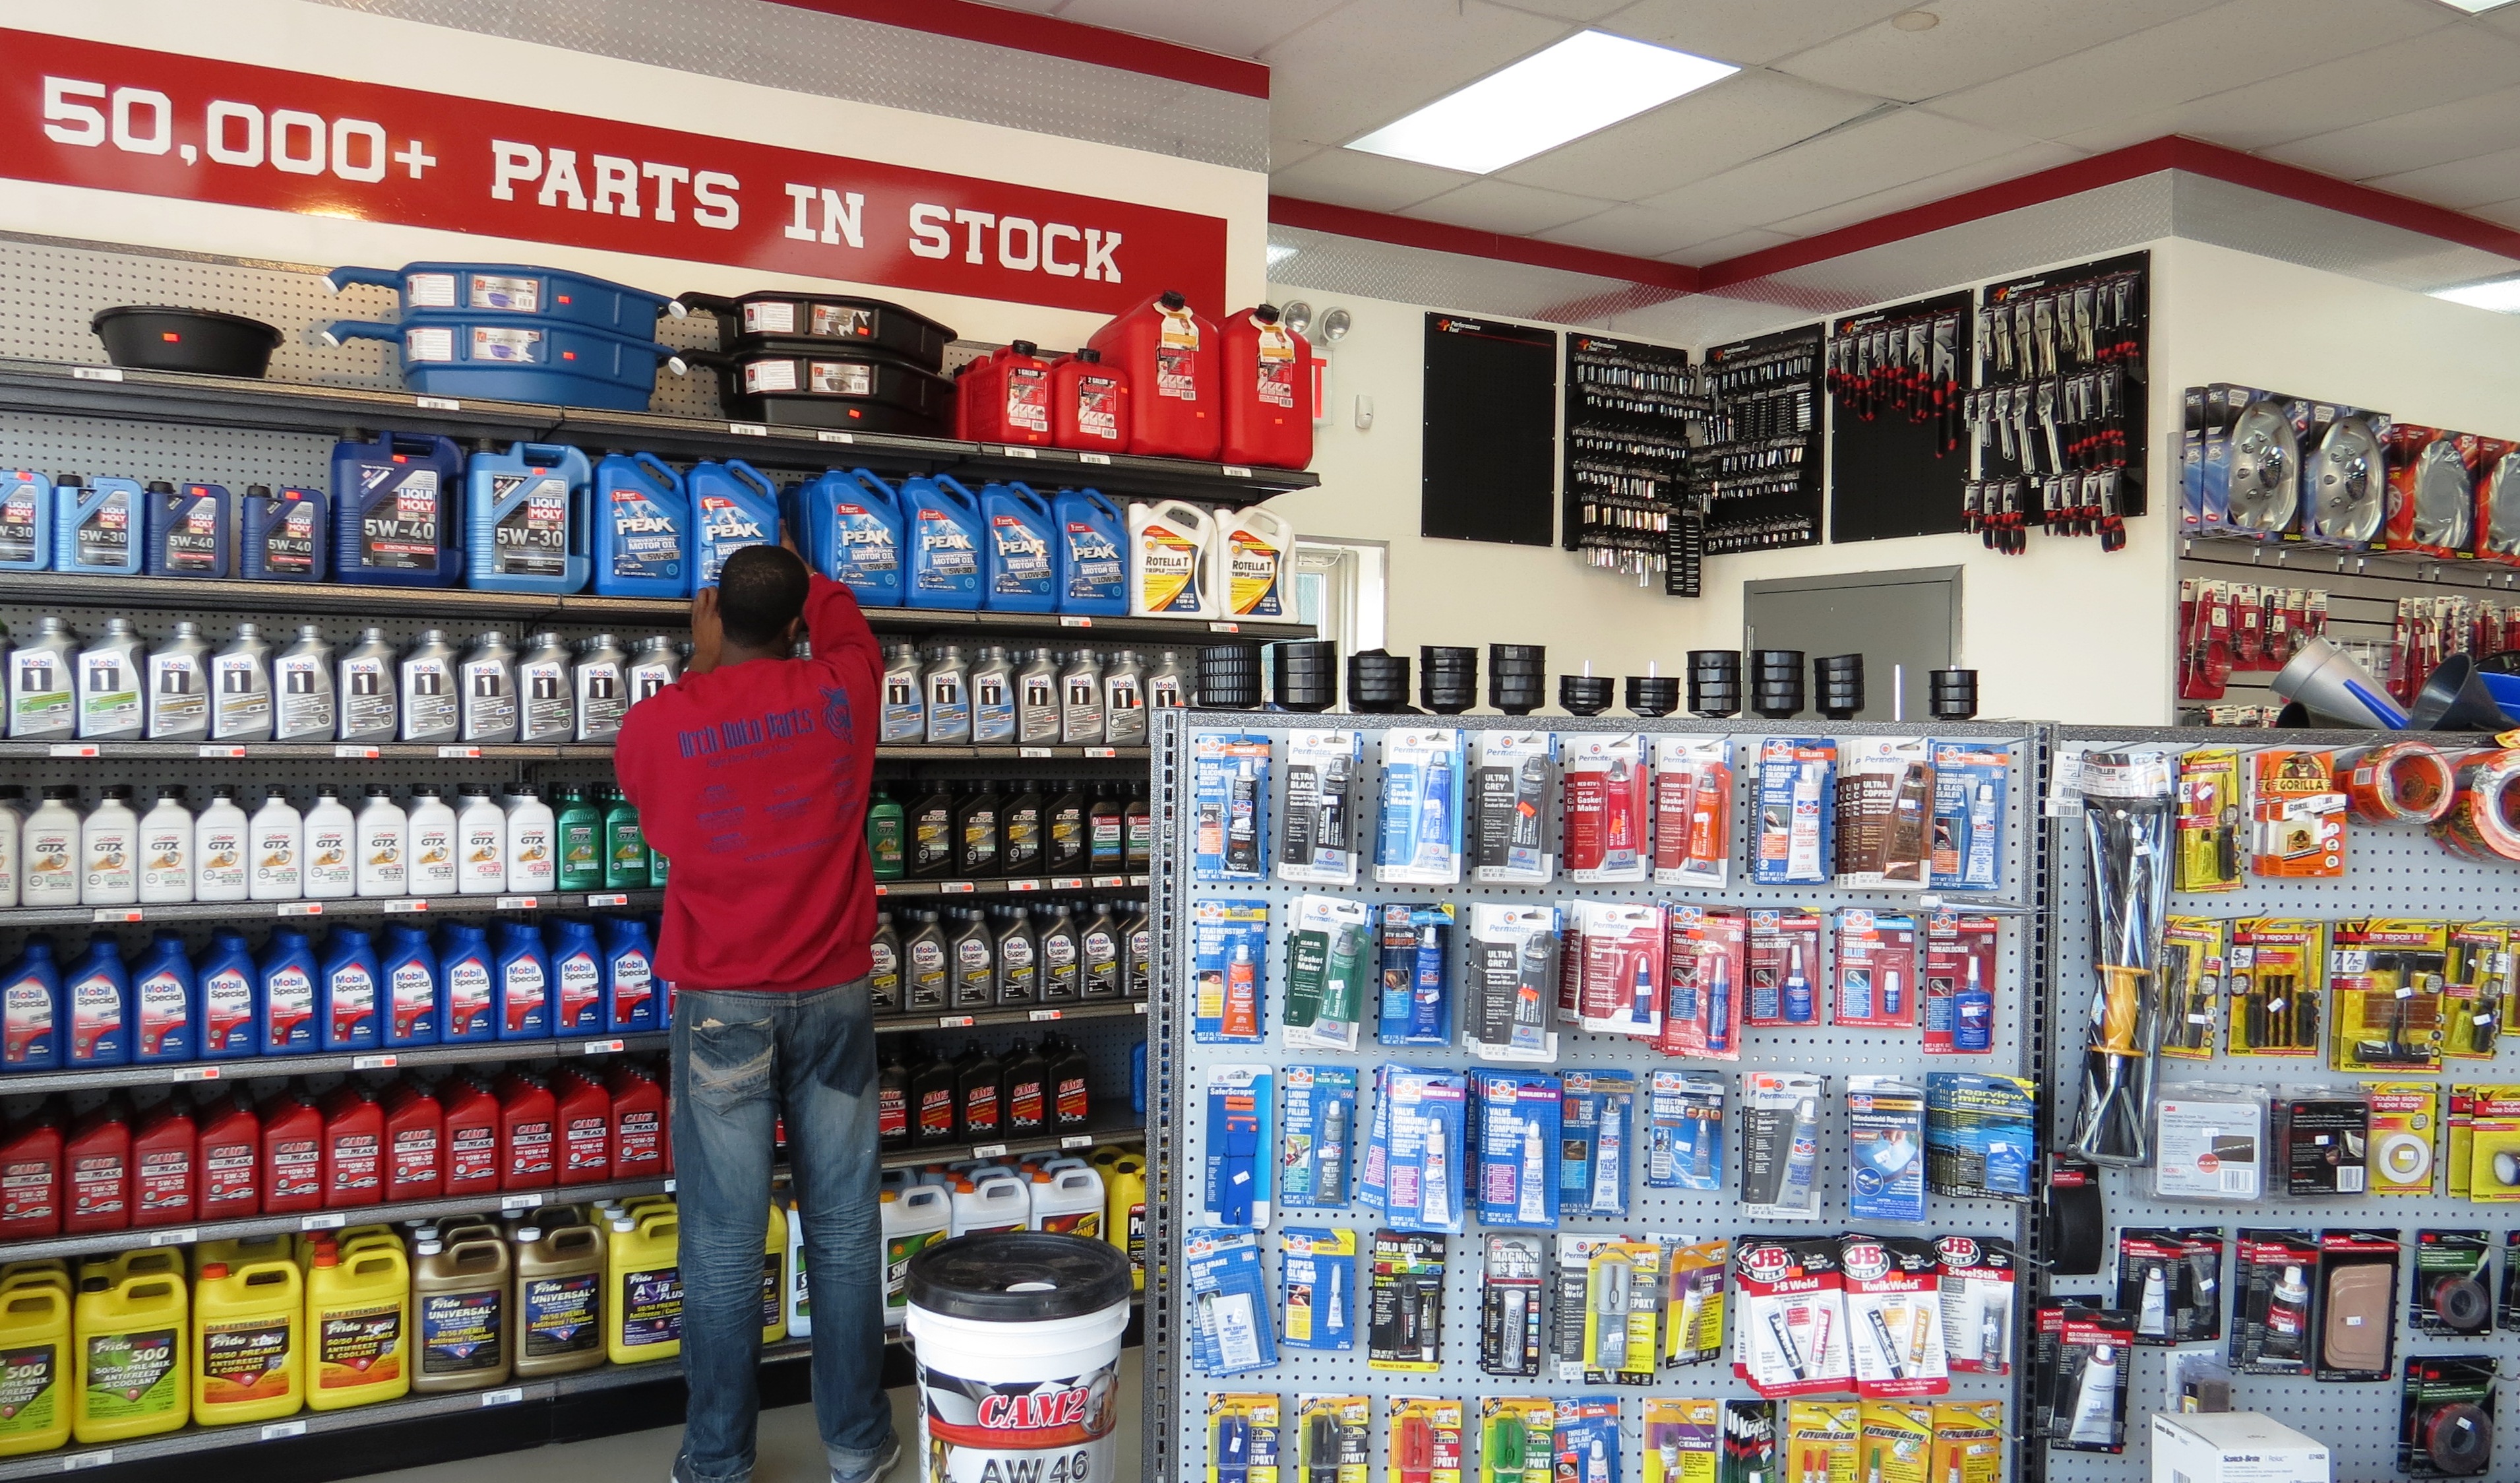 With 50,000 OE-quality parts in stock, Arch Auto Parts customers find the national brands and selection to get the job done right- the first time.